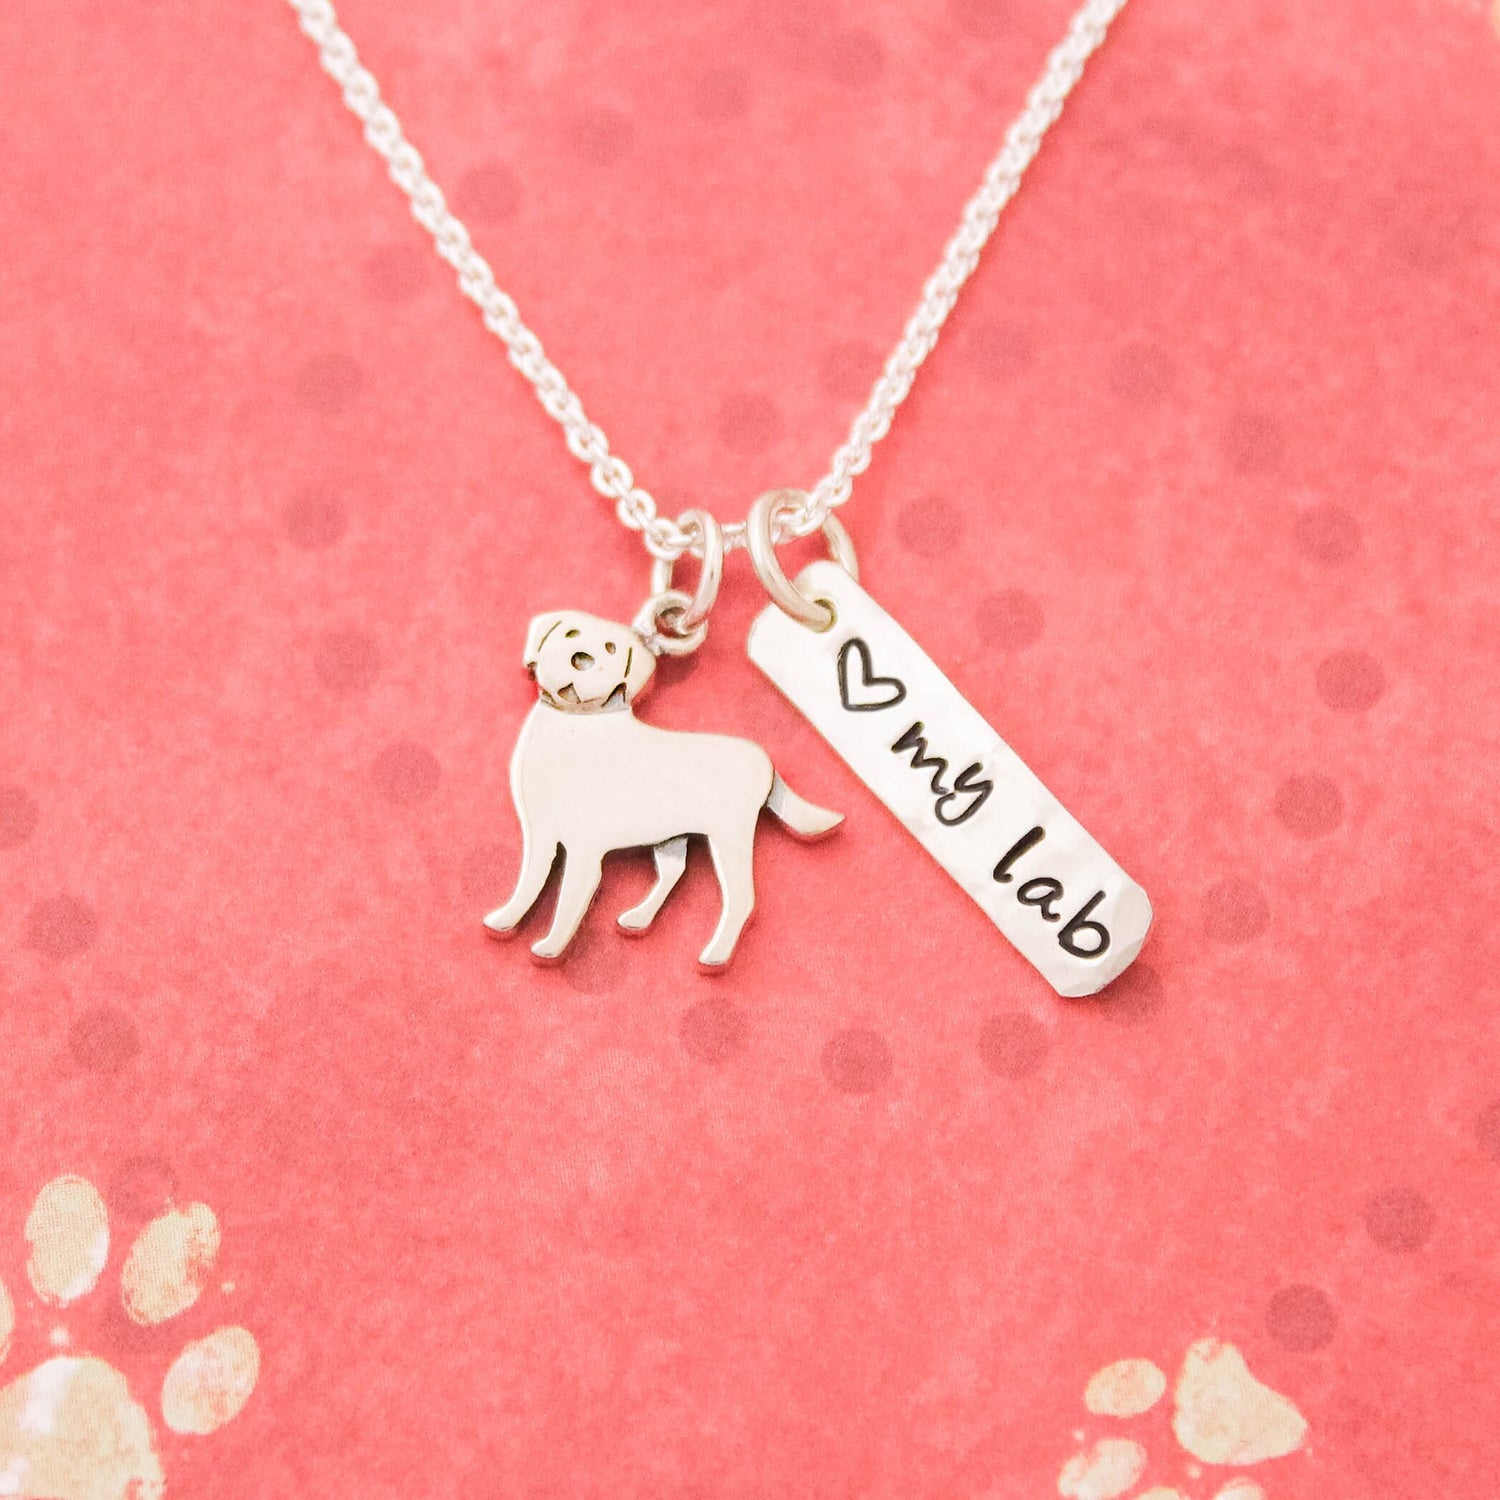 LOVE my LAB Necklace, Sterling Silver Labrador Dog Necklace, Lab Lover Gift, New Pet Gift, Labrador Retriever Jewelry, Hand Stamped Lab Gift